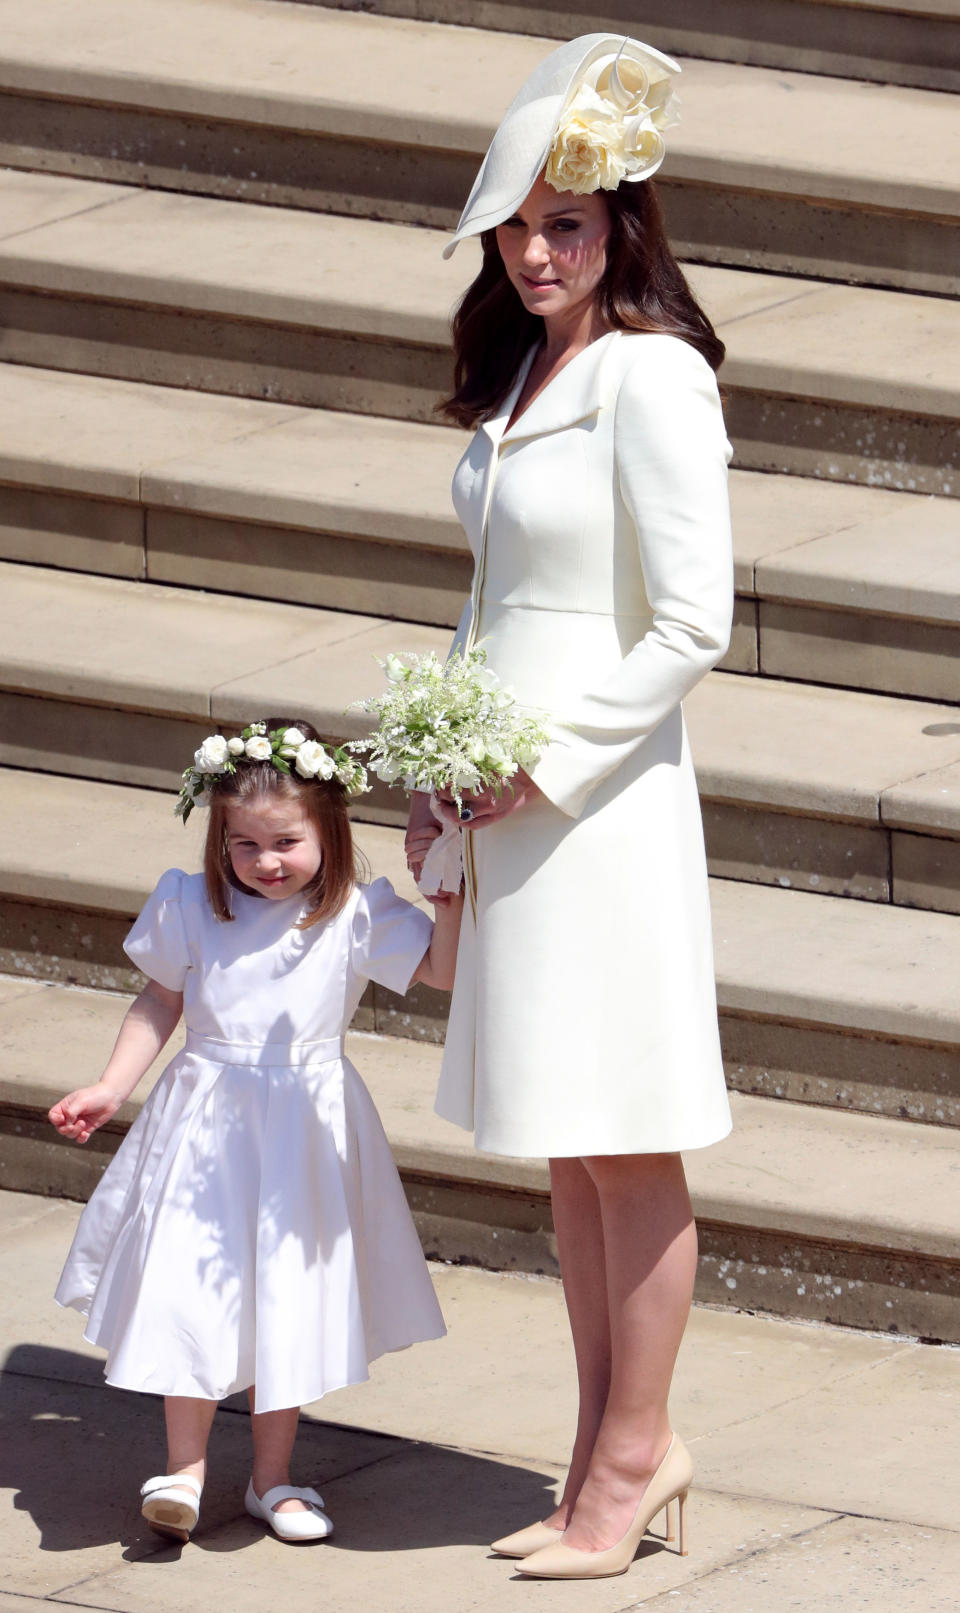 <p>For the Duke and Duchess of Sussex’s royal nuptials, the Duchess of Cambridge wore a primrose yellow coat dress by Alexander McQueen. She first donned the look at Princess Charlotte’s christening in white. <em>[Photo: Getty]</em> </p>